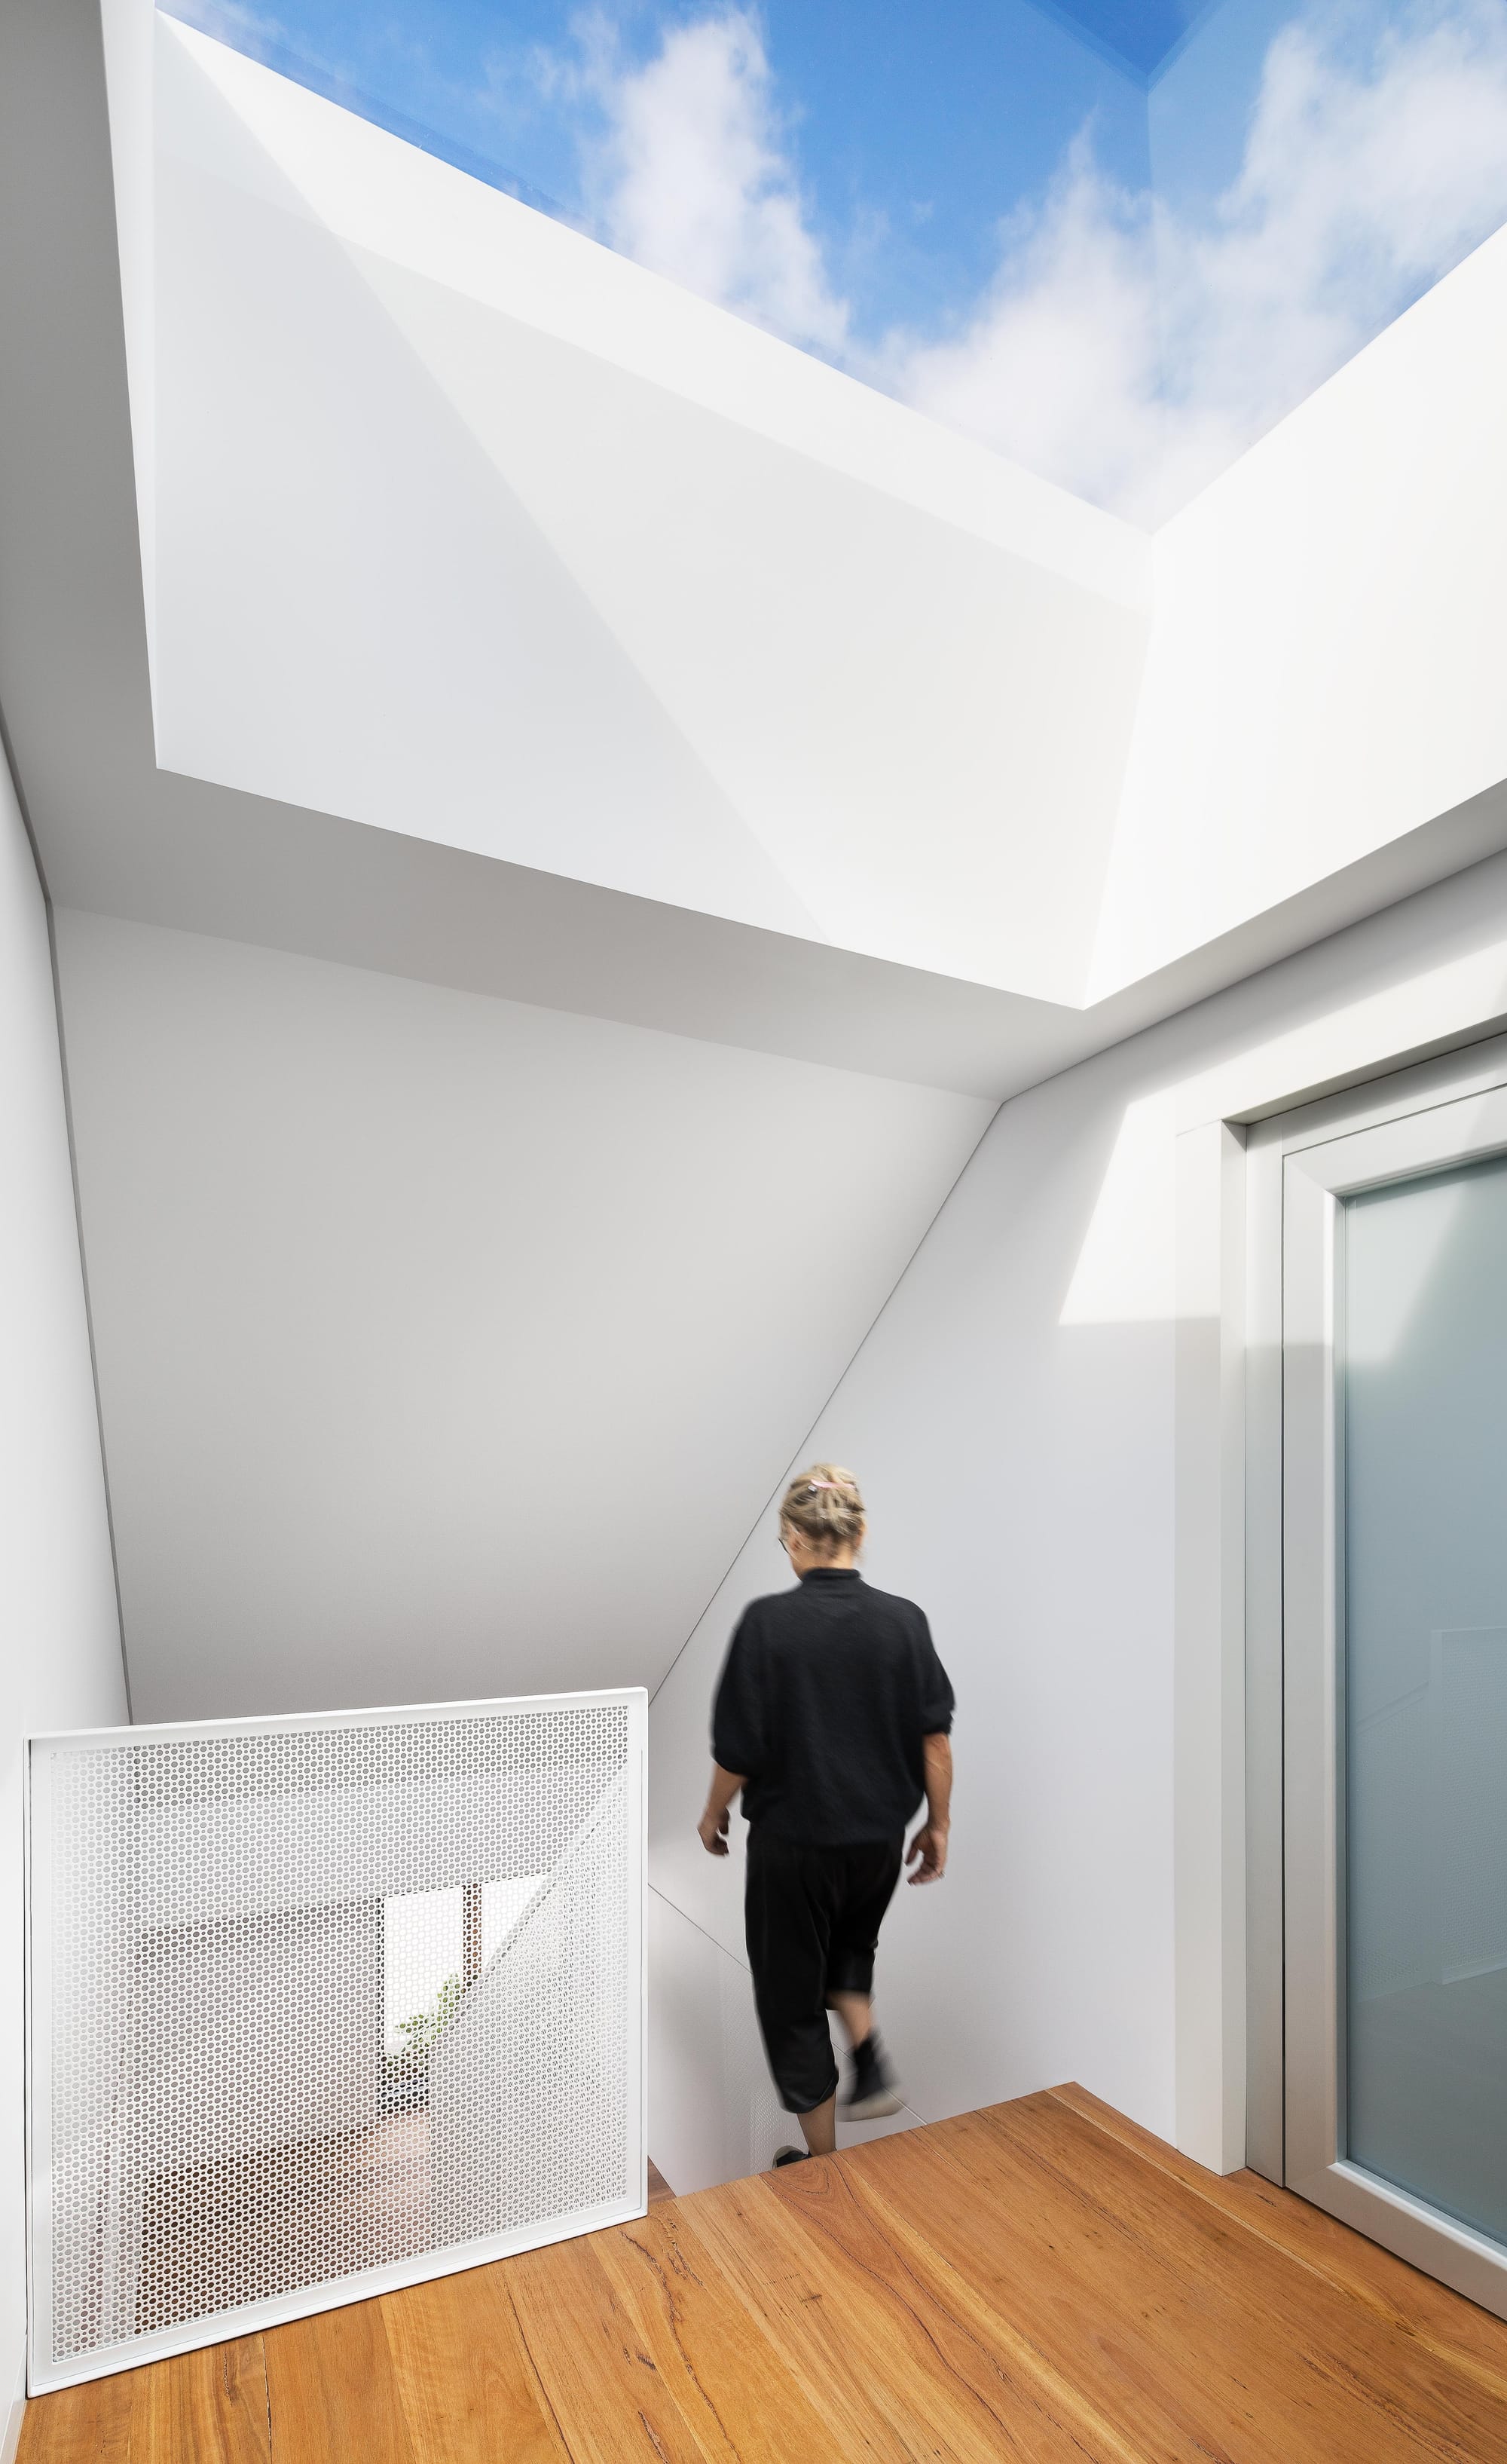 An internal shot of the staircase with a white metal balustrade and large skylight above